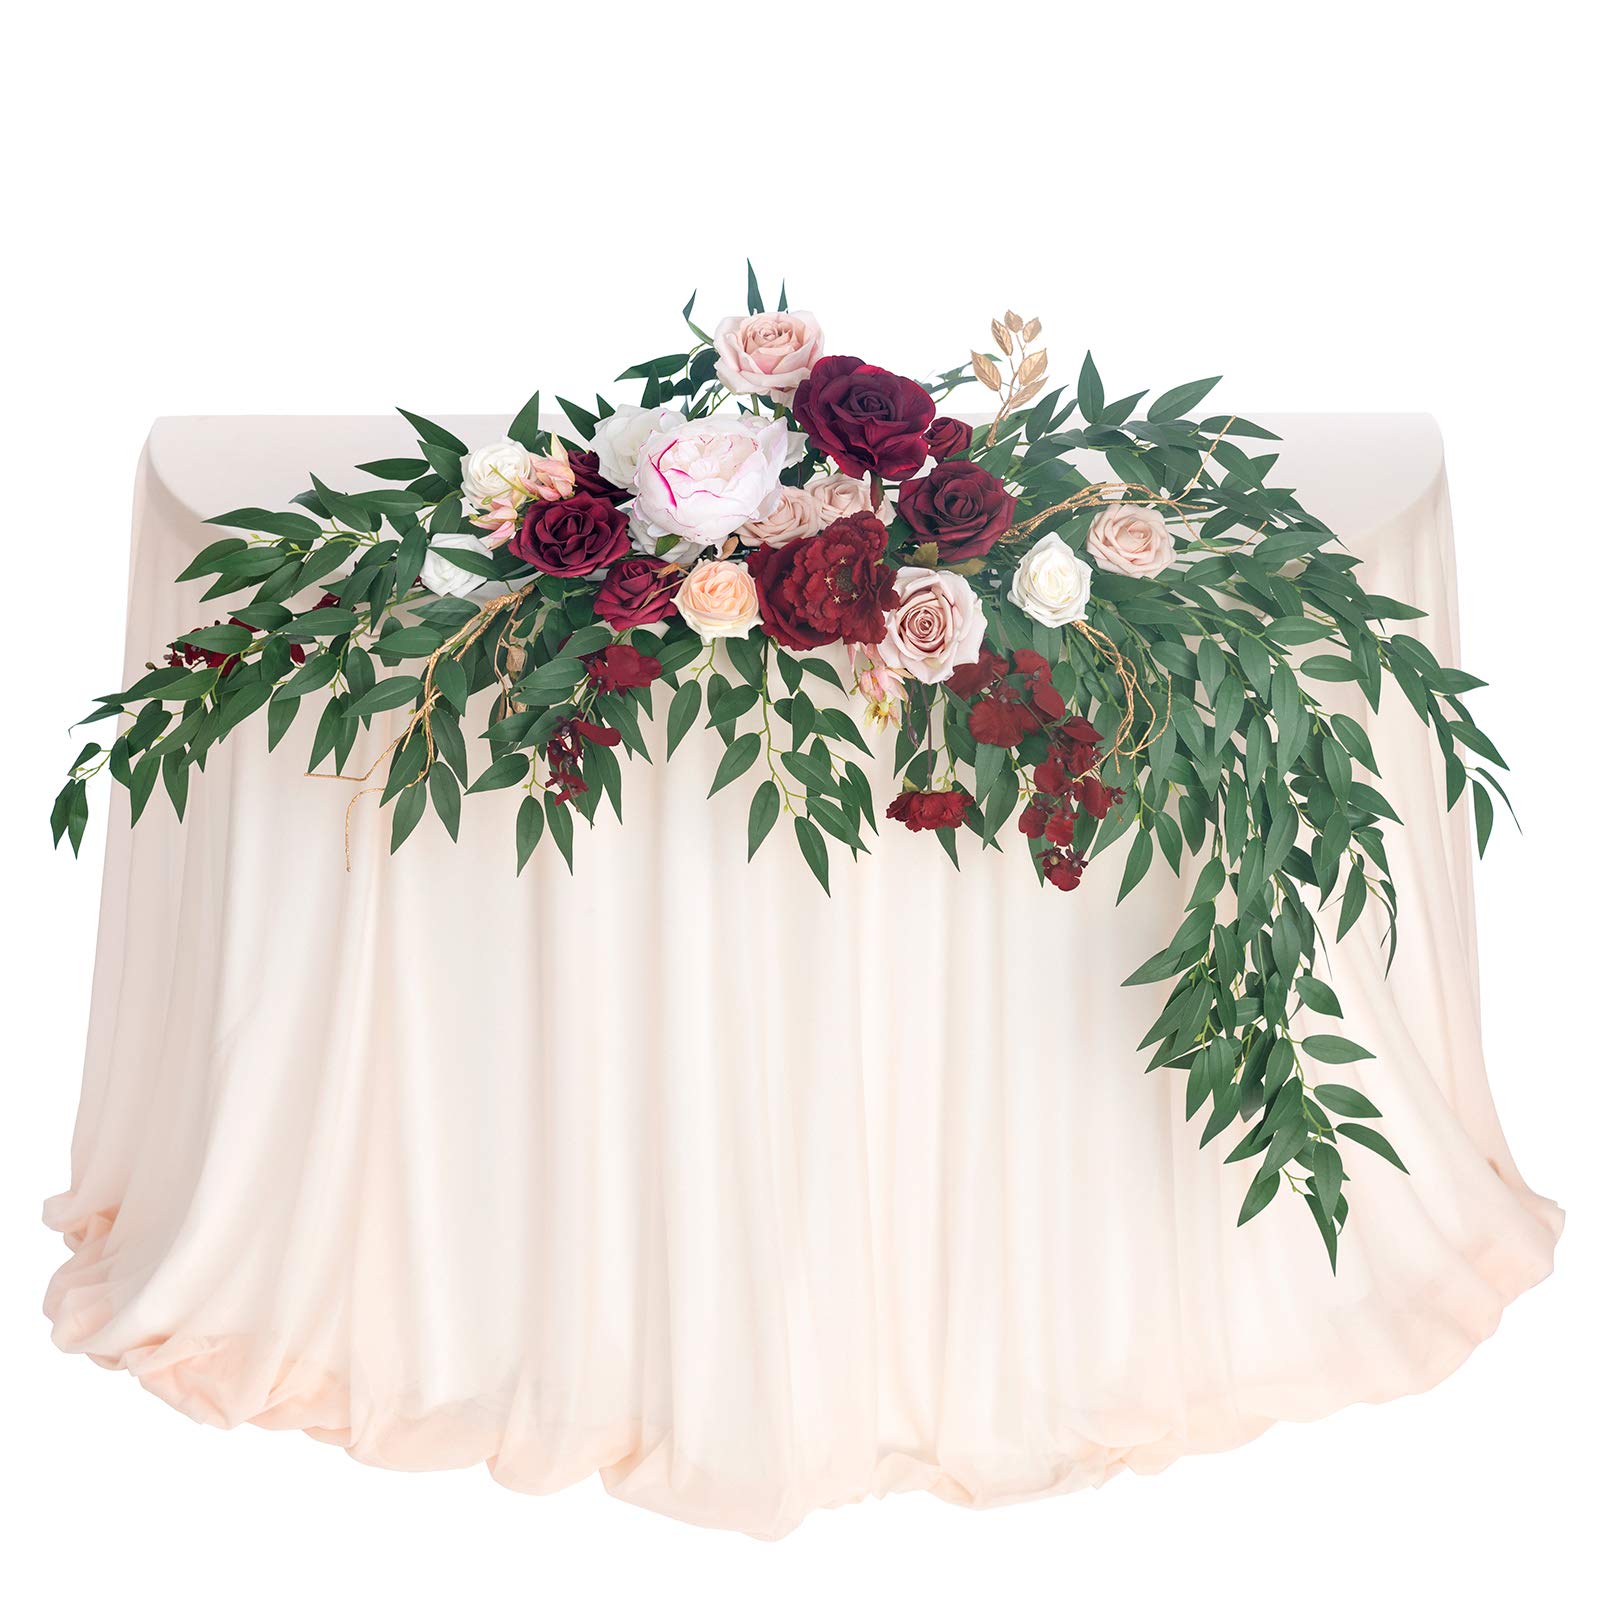 Ling's moment Artificial Flower Swag Floral Arrangement Centerpiece for Wedding Reception Sweetheart Table Decorations Tablecloth Included (Mar...